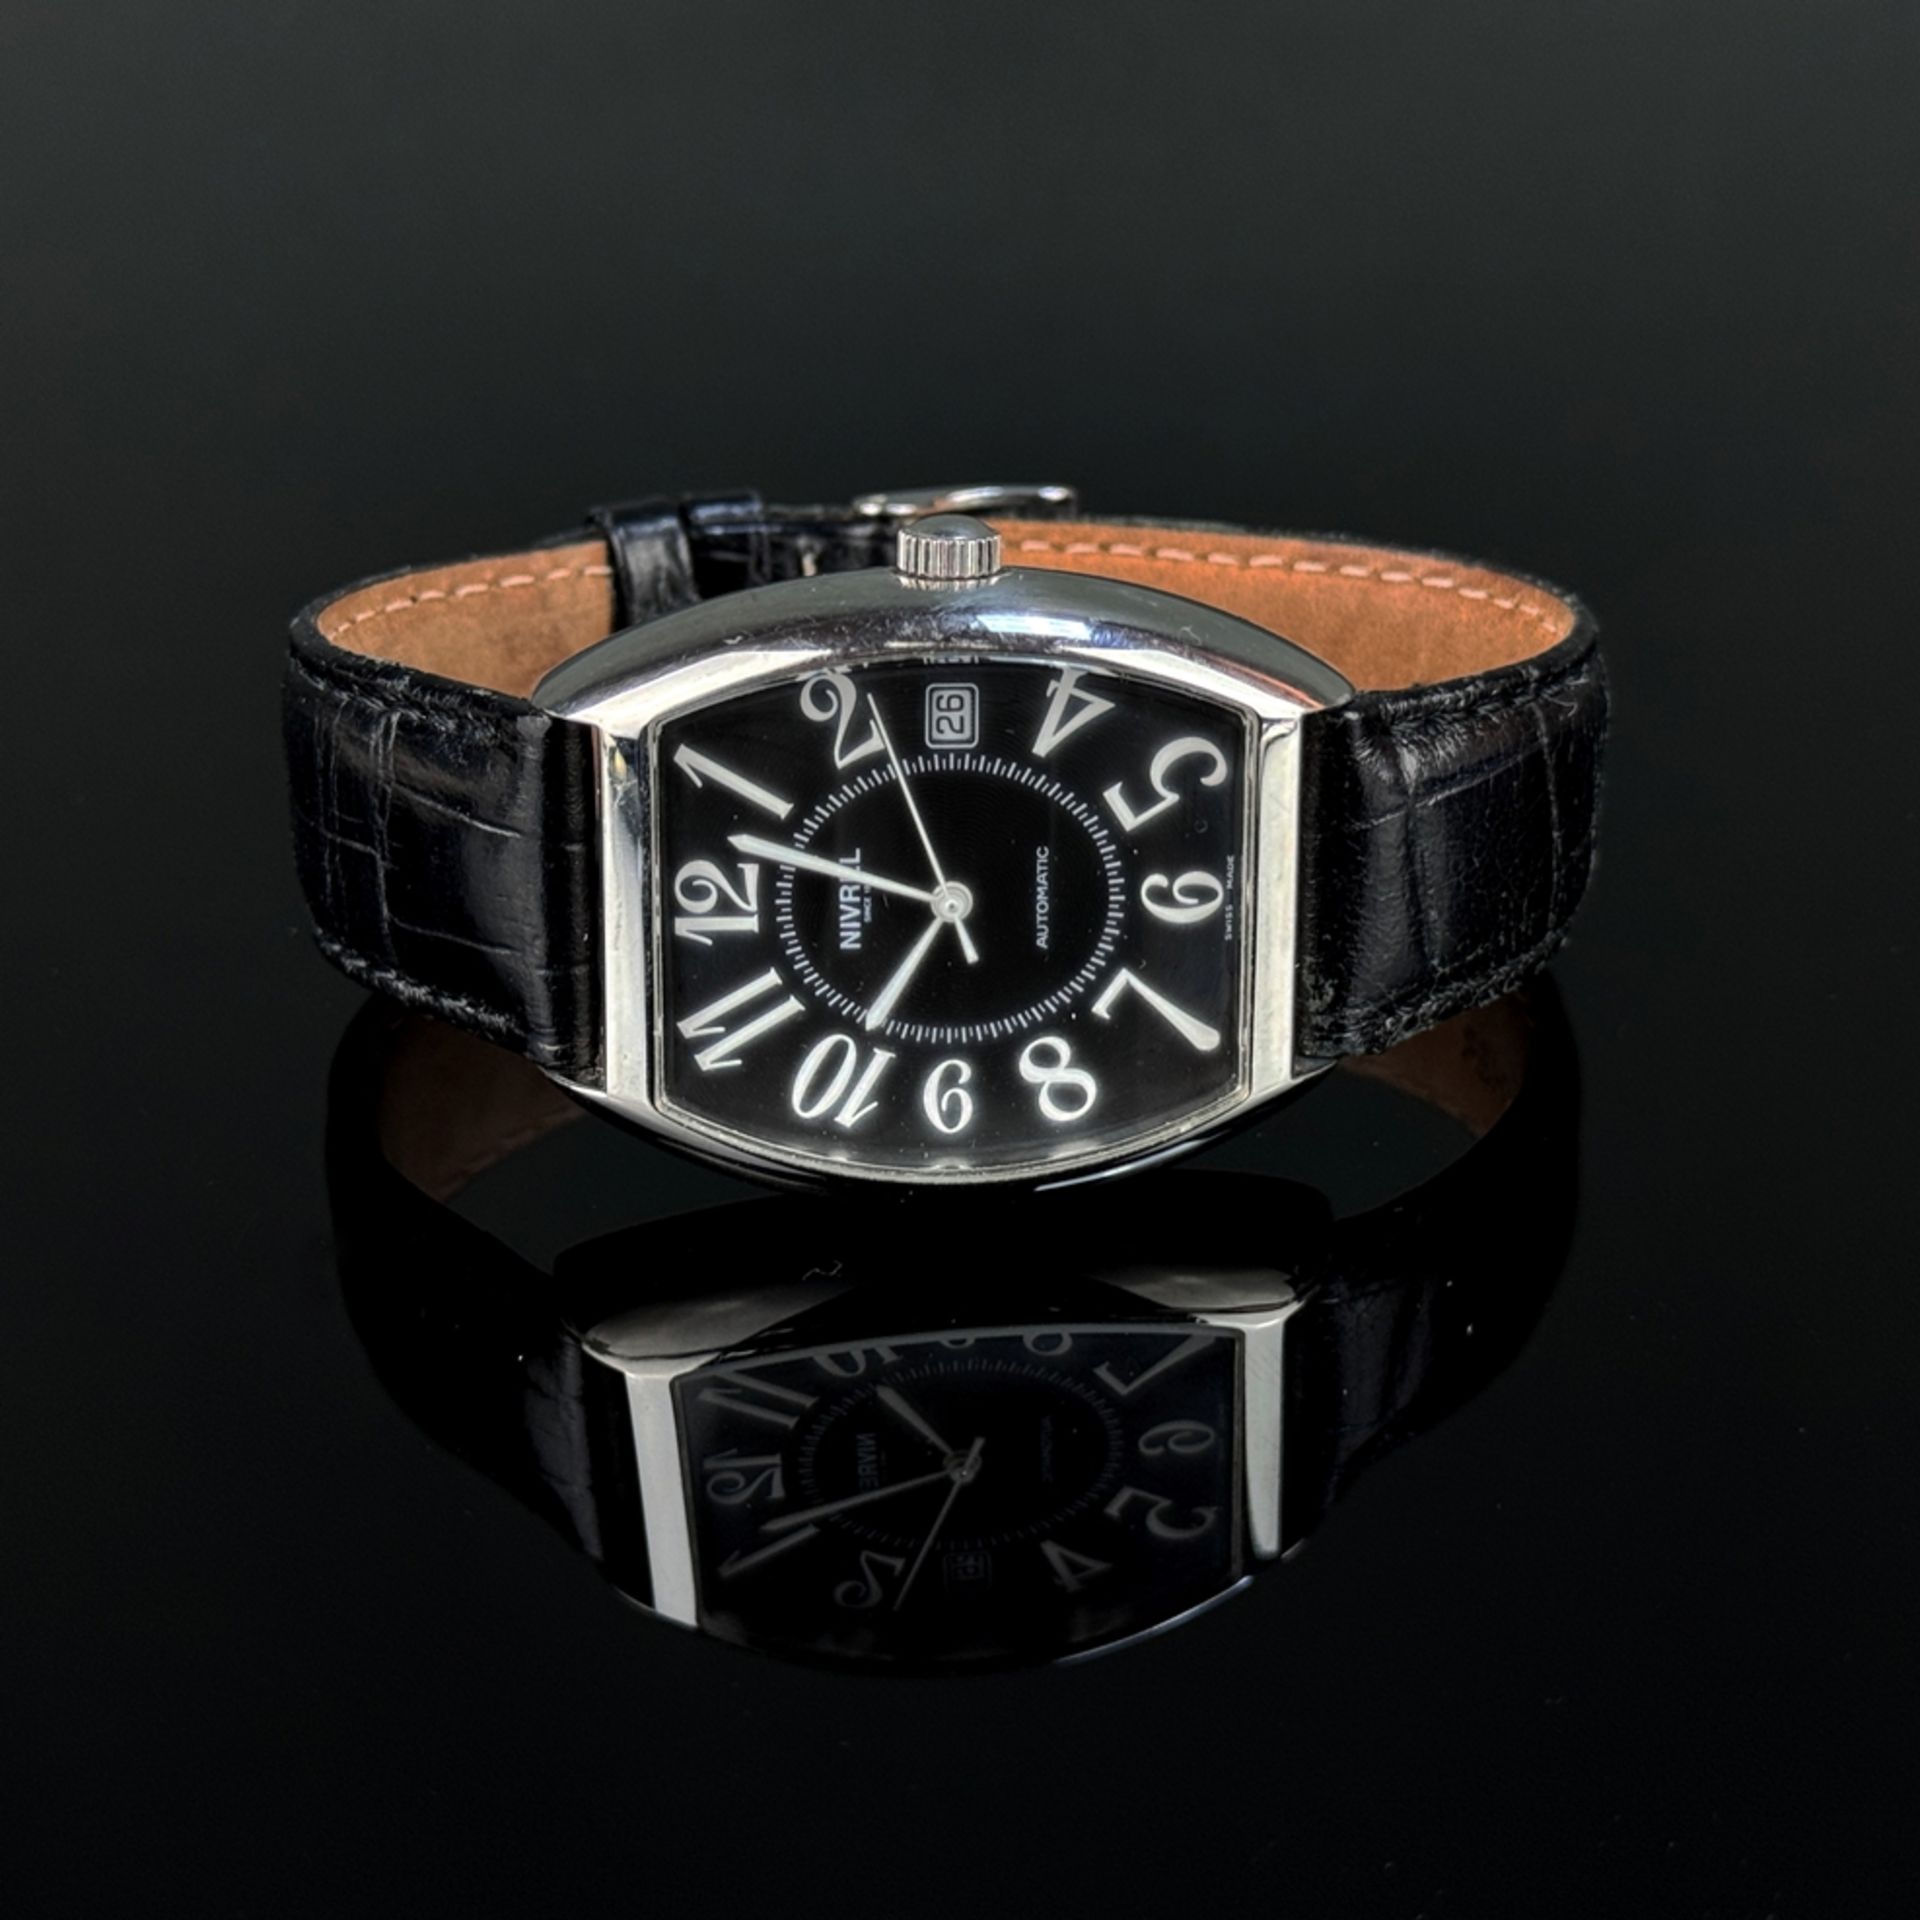 Wristwatch, Nivrel Automatic, "Tonneau" with centre seconds and date, steel case with glass back, d